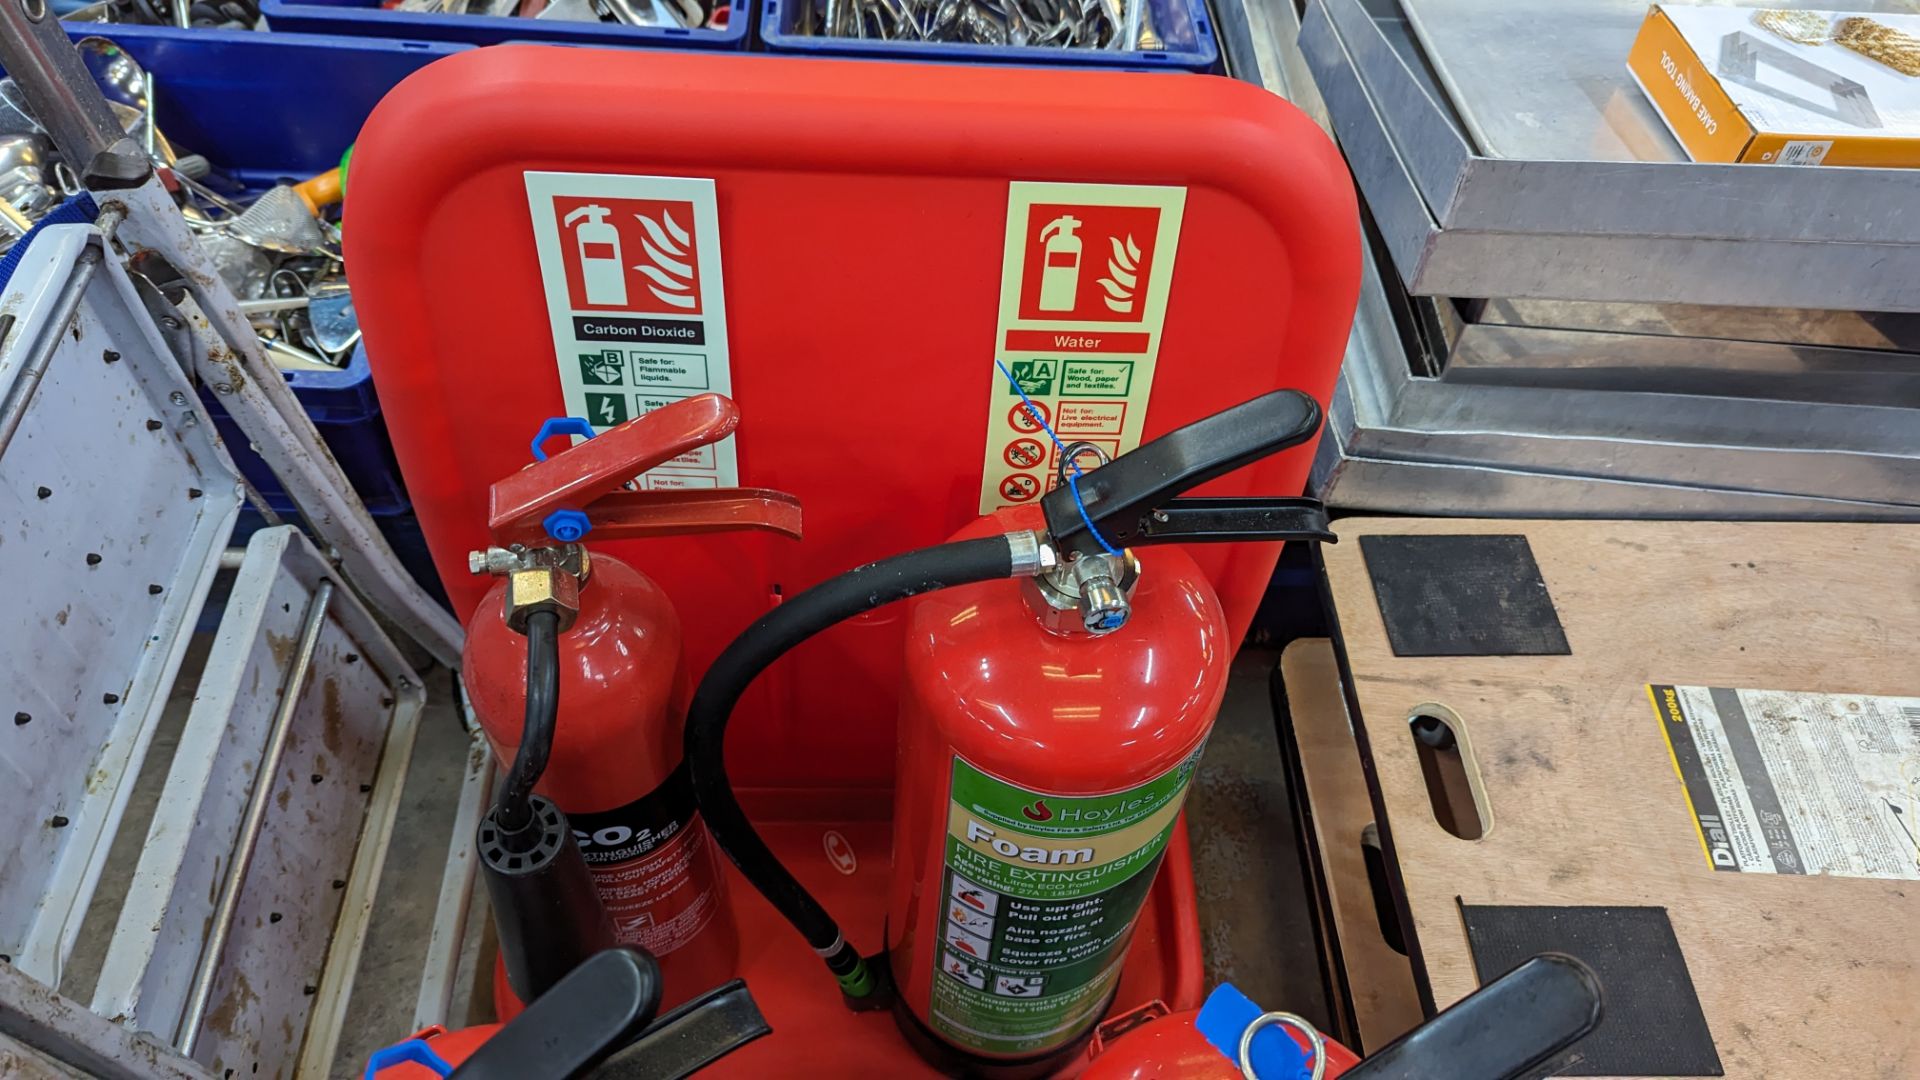 9 off fire extinguishers plus display stand for use with same - Image 6 of 6